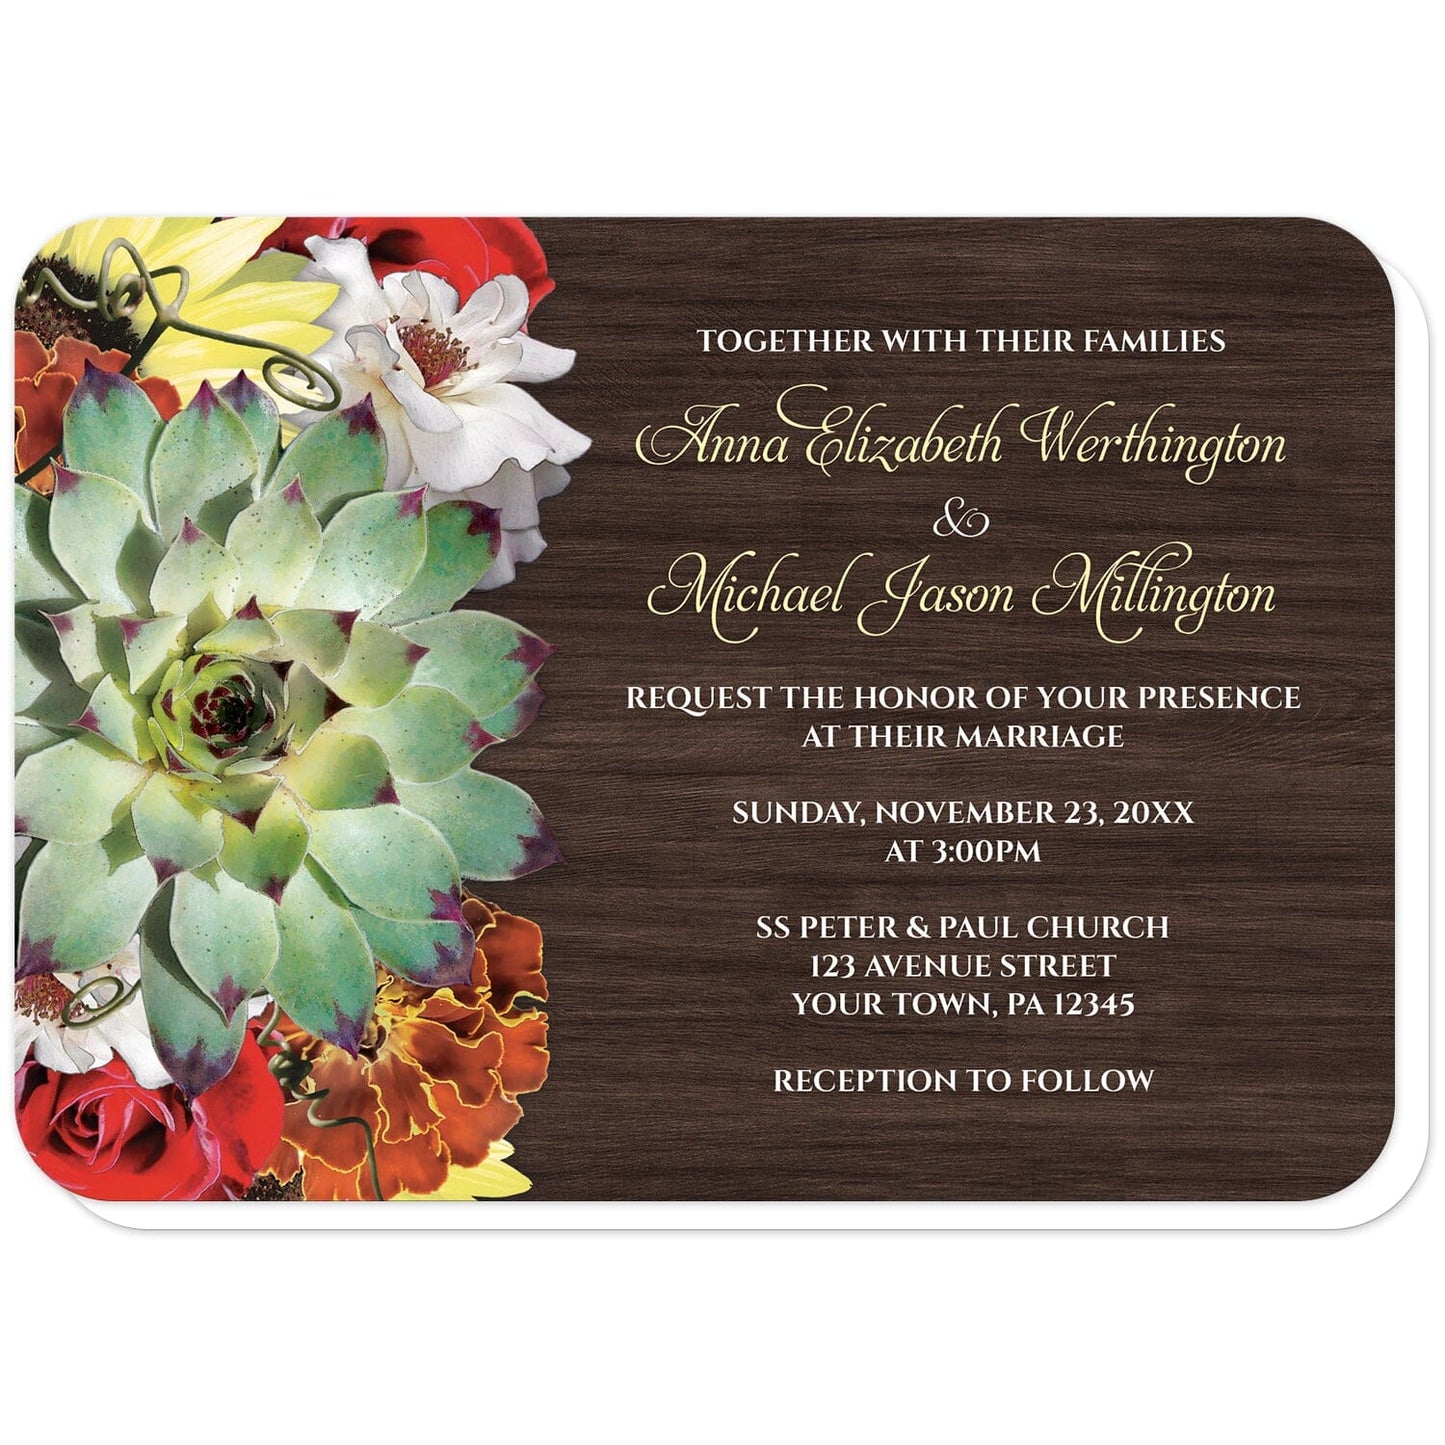 Autumn Floral Bouquet Wood Wedding Invitations (with rounded corners) at Artistically Invited. Autumn floral bouquet wood wedding invitations with a floral bouquet theme that includes a green succulent, yellow sunflowers, white and red roses, and a marigold over a dark brown rustic wood background design. Your personalized wedding details are custom printed in white and a muted yellow over the wood background.